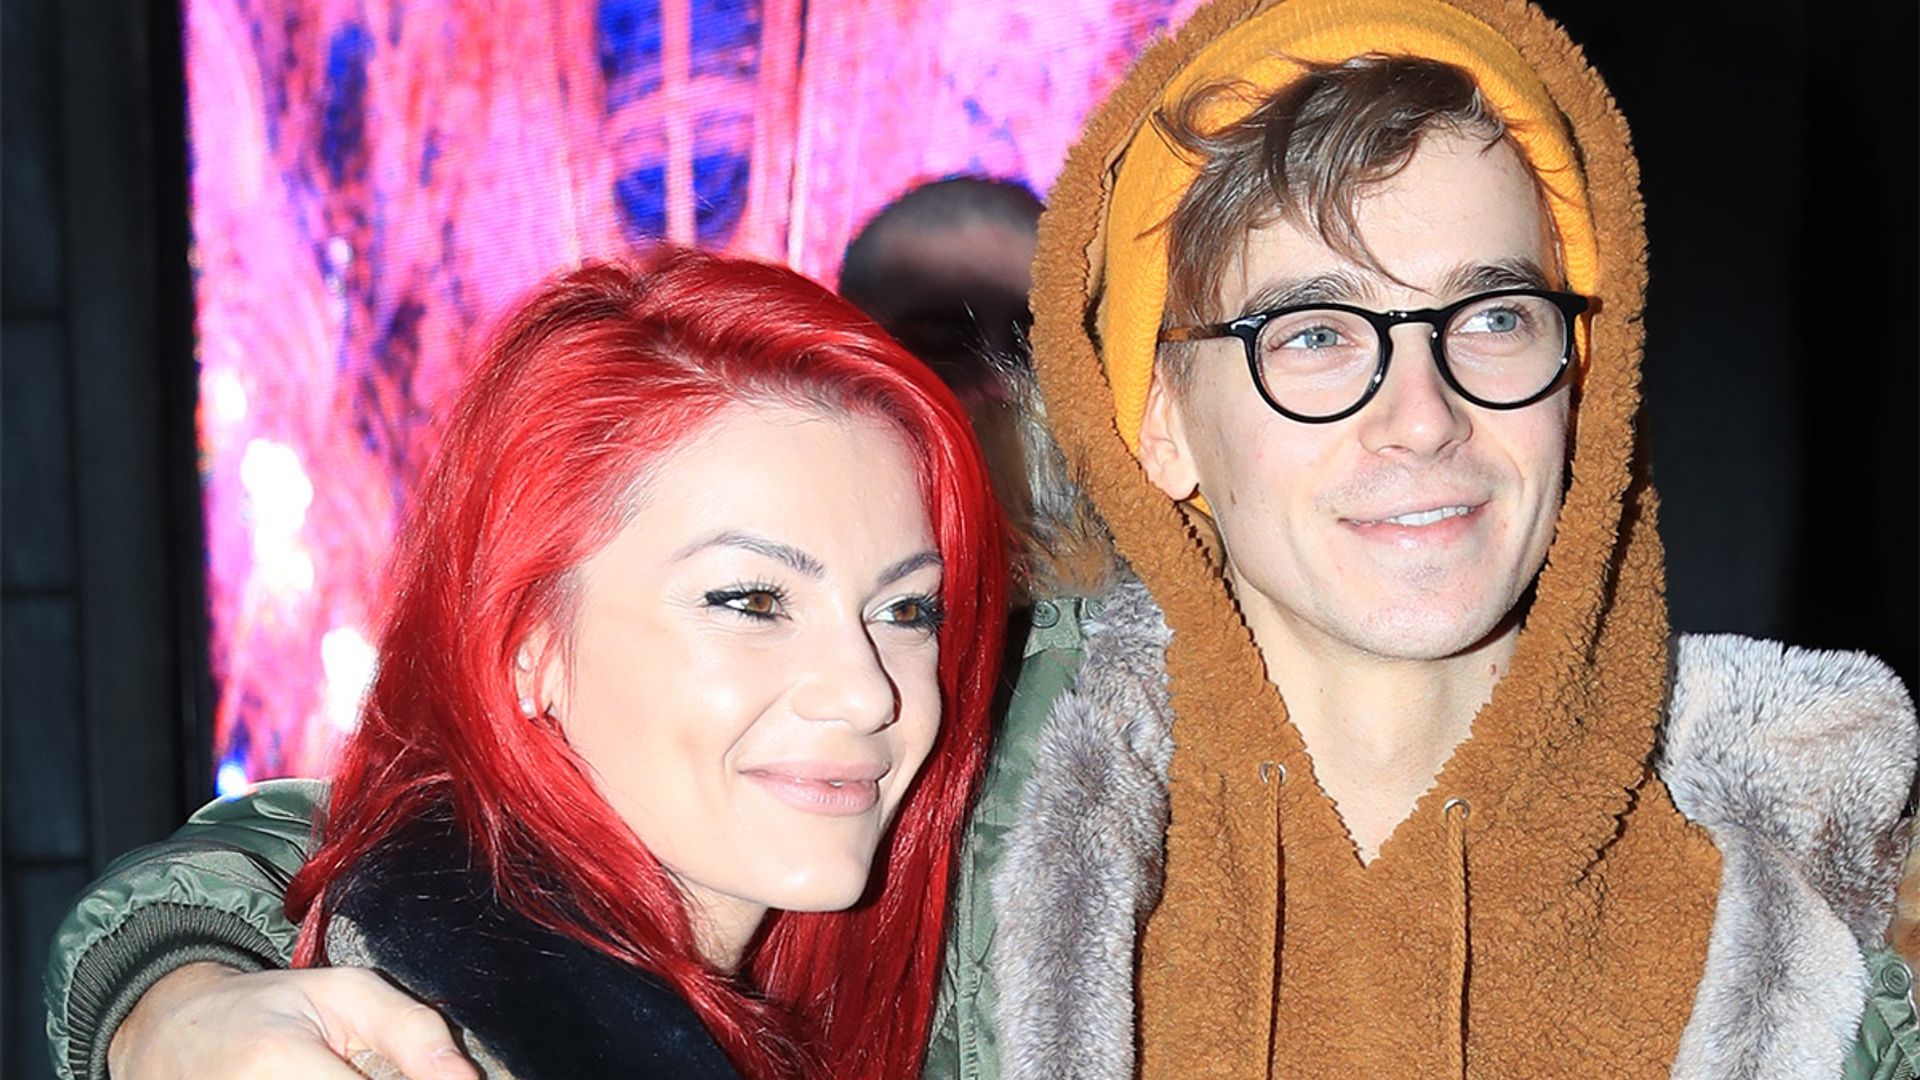 Dianne Buswell shares loved up photo with Joe Sugg after surprise 'hen party' photo